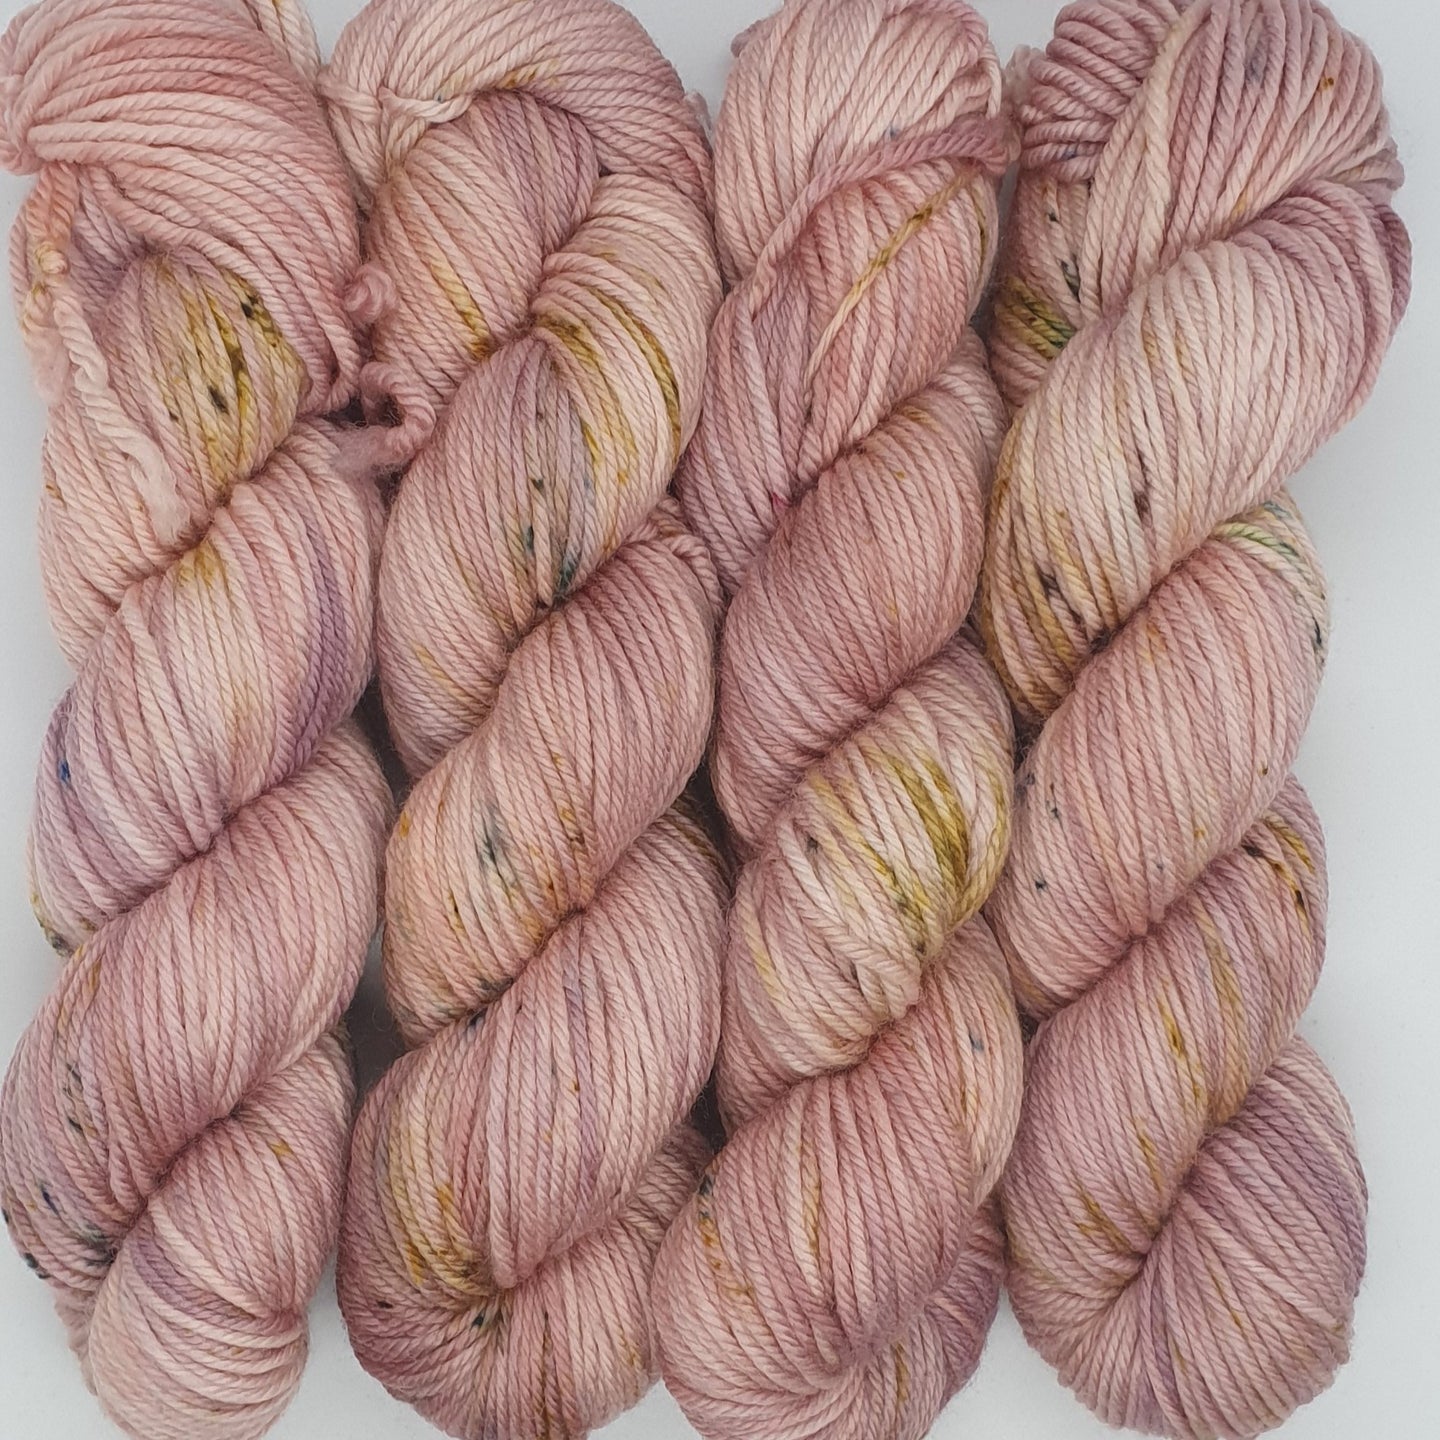 Lingering (Wyvern Worsted 12ply)